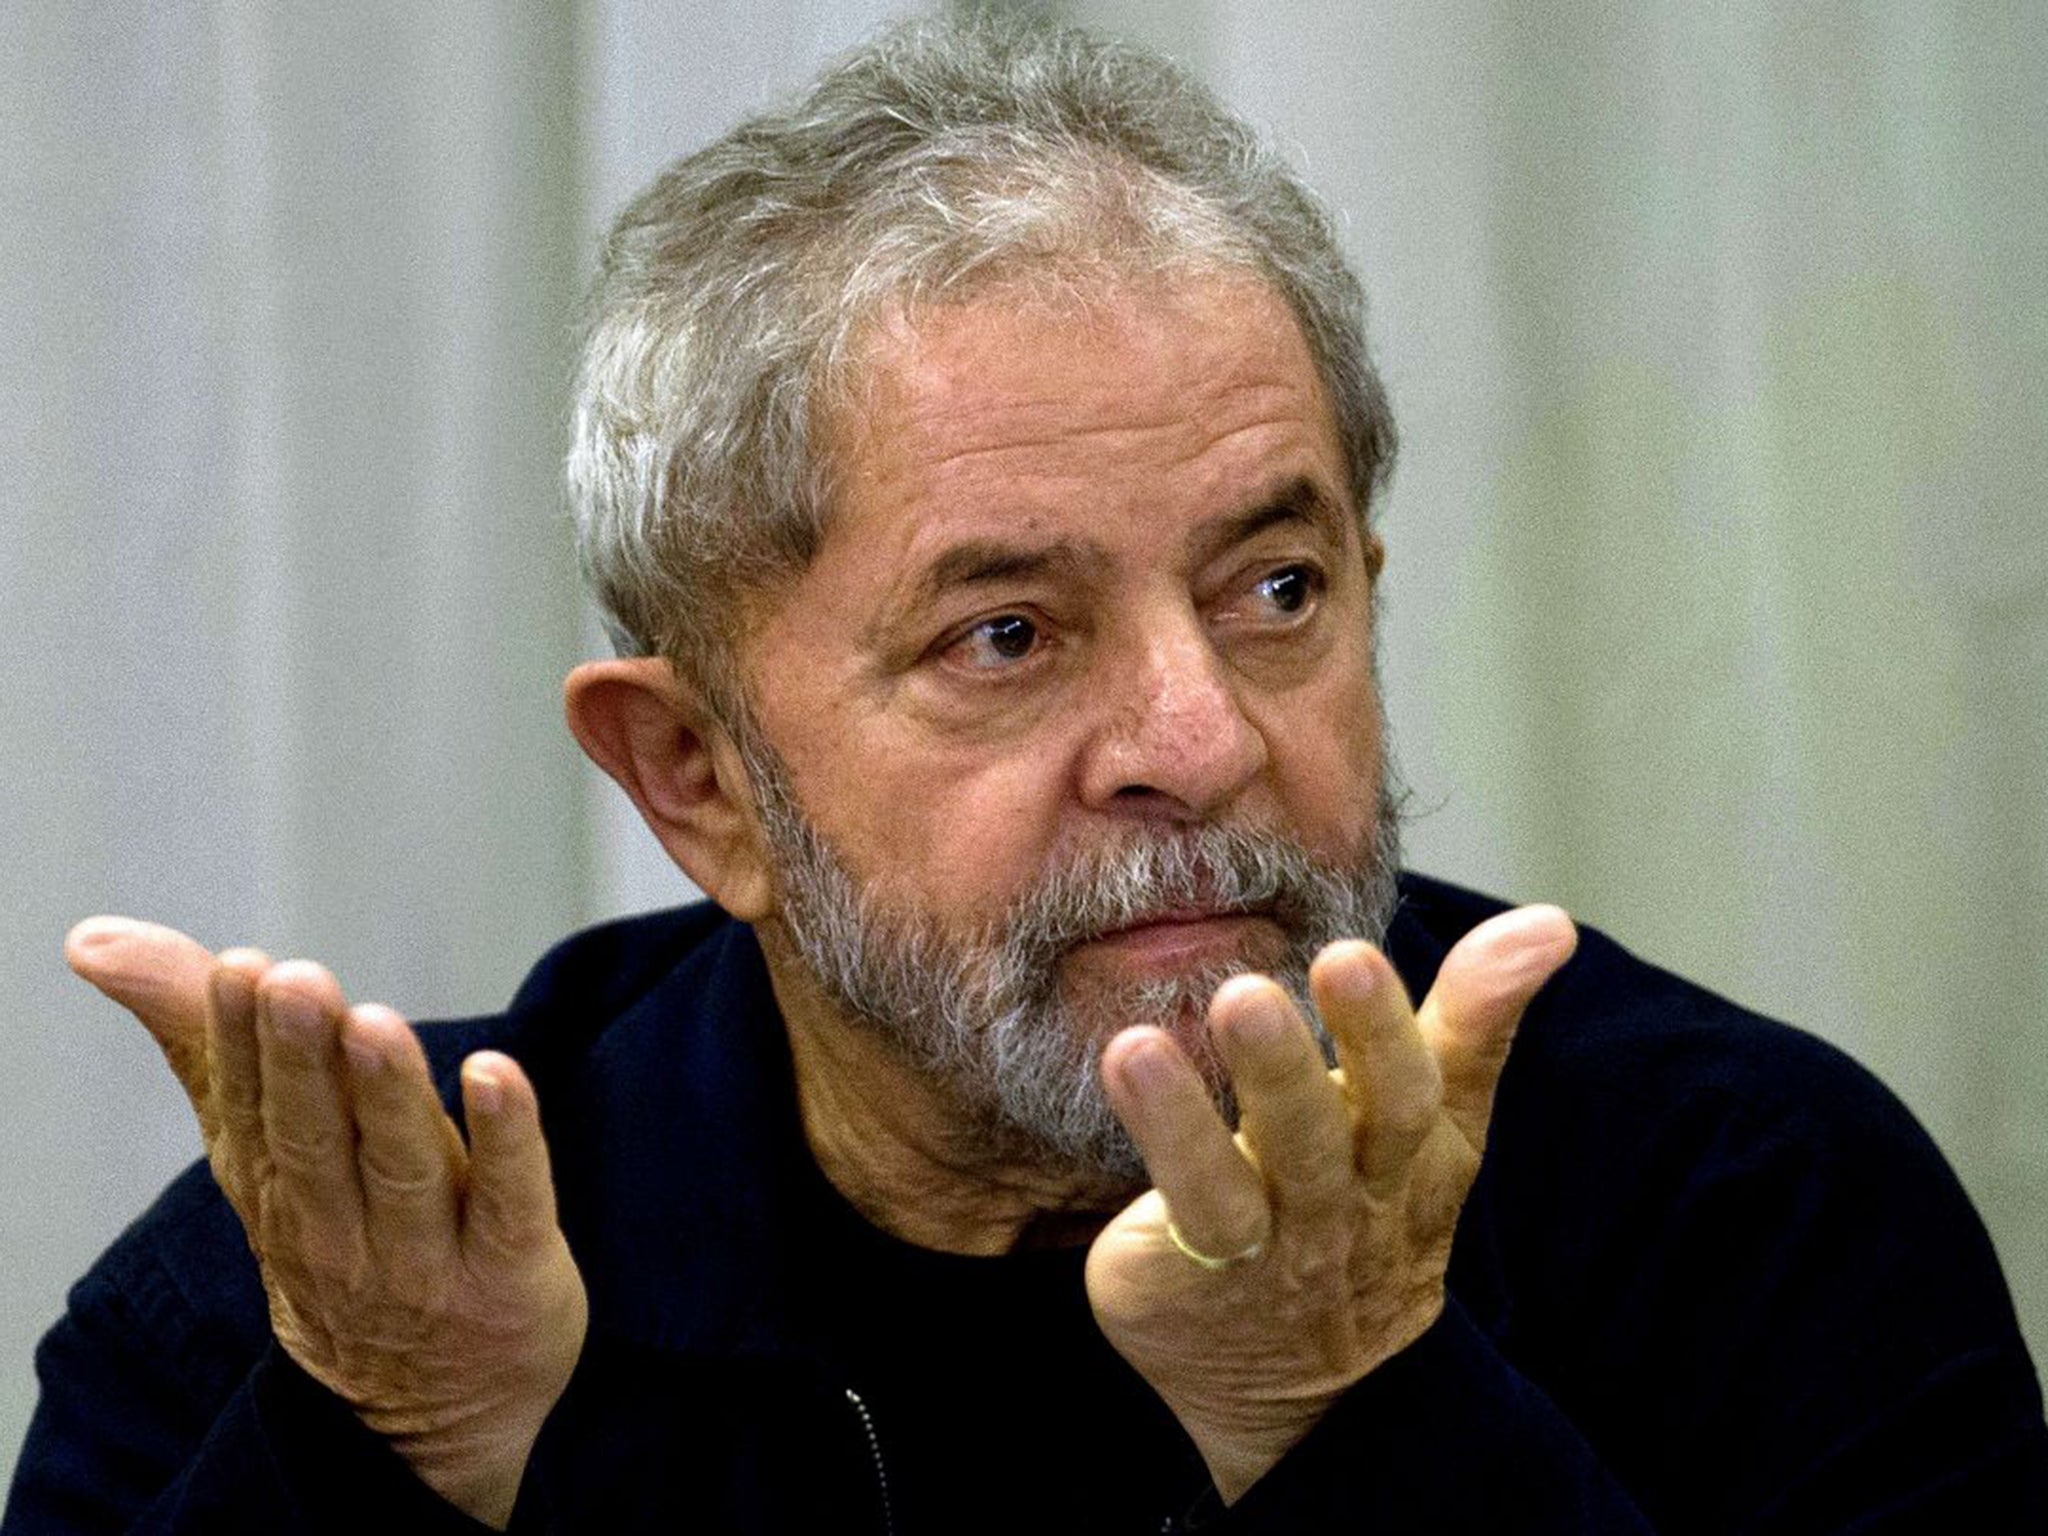 Lula, who was president from 2003-2010, has already faced police questioning over the financial dealings of one of his sons